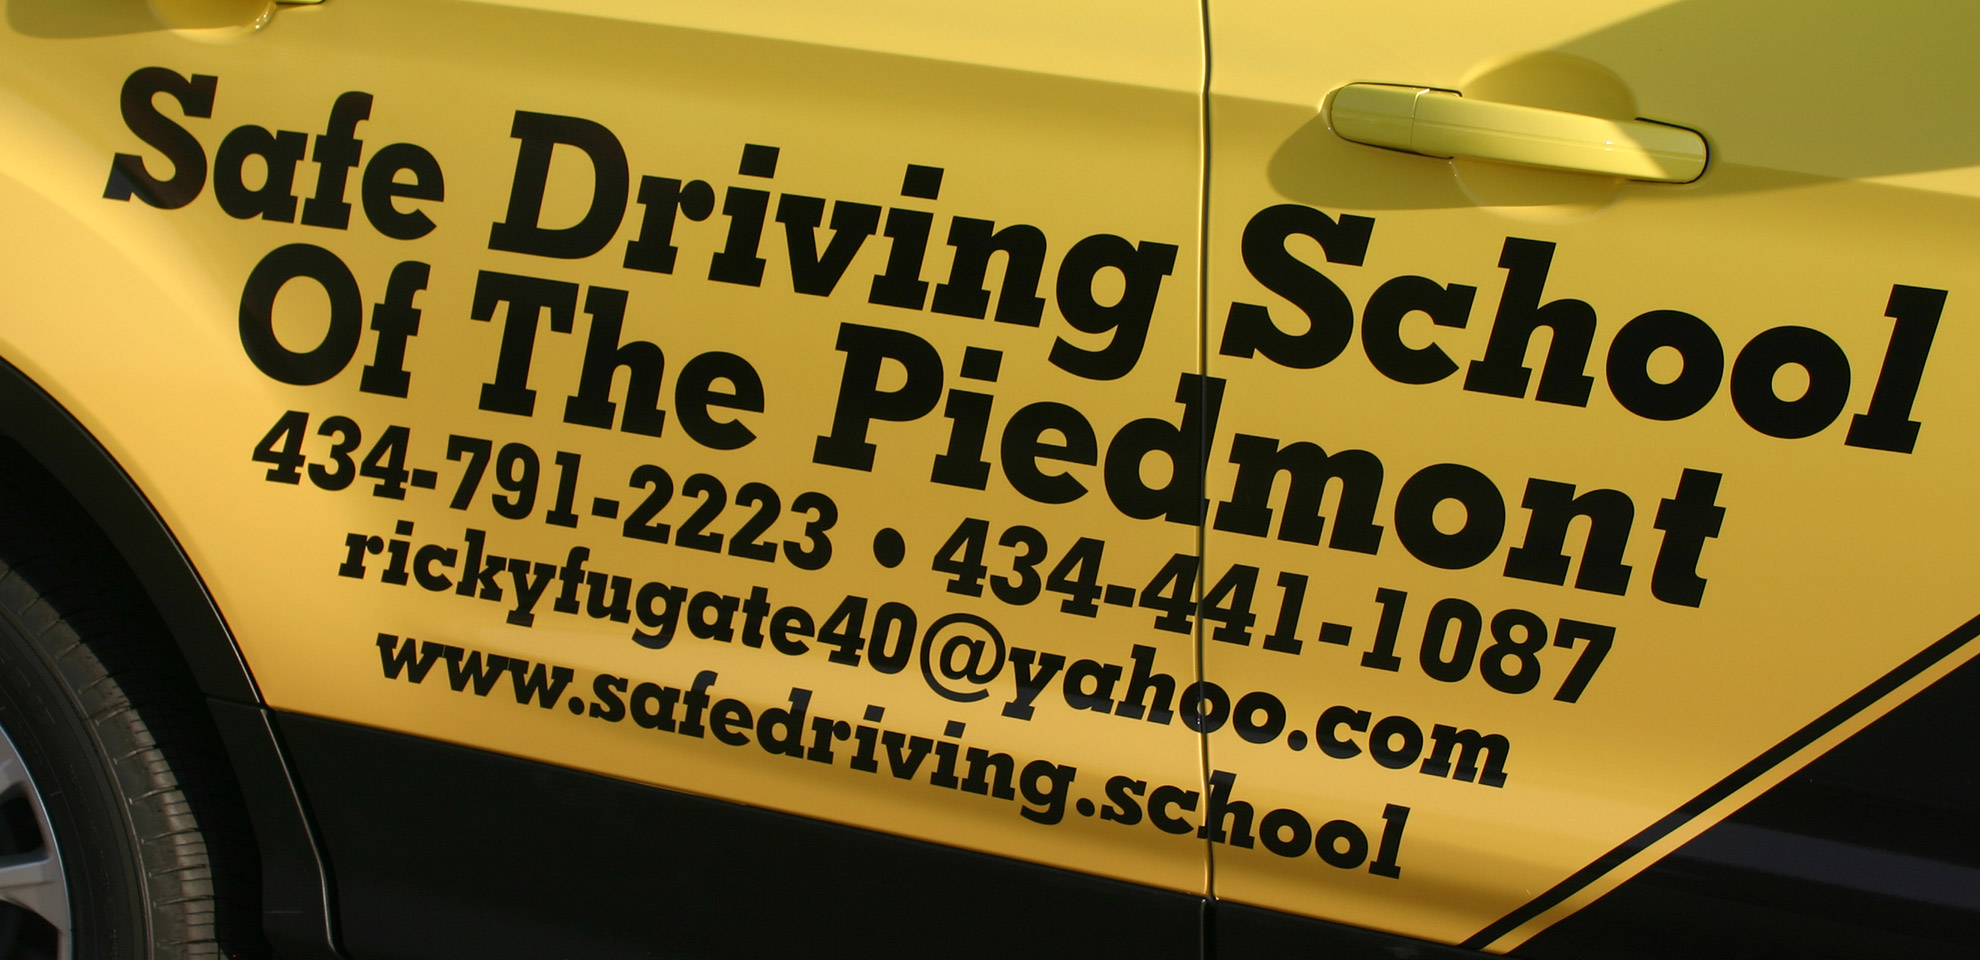 safe driving school of the piedmont contact information